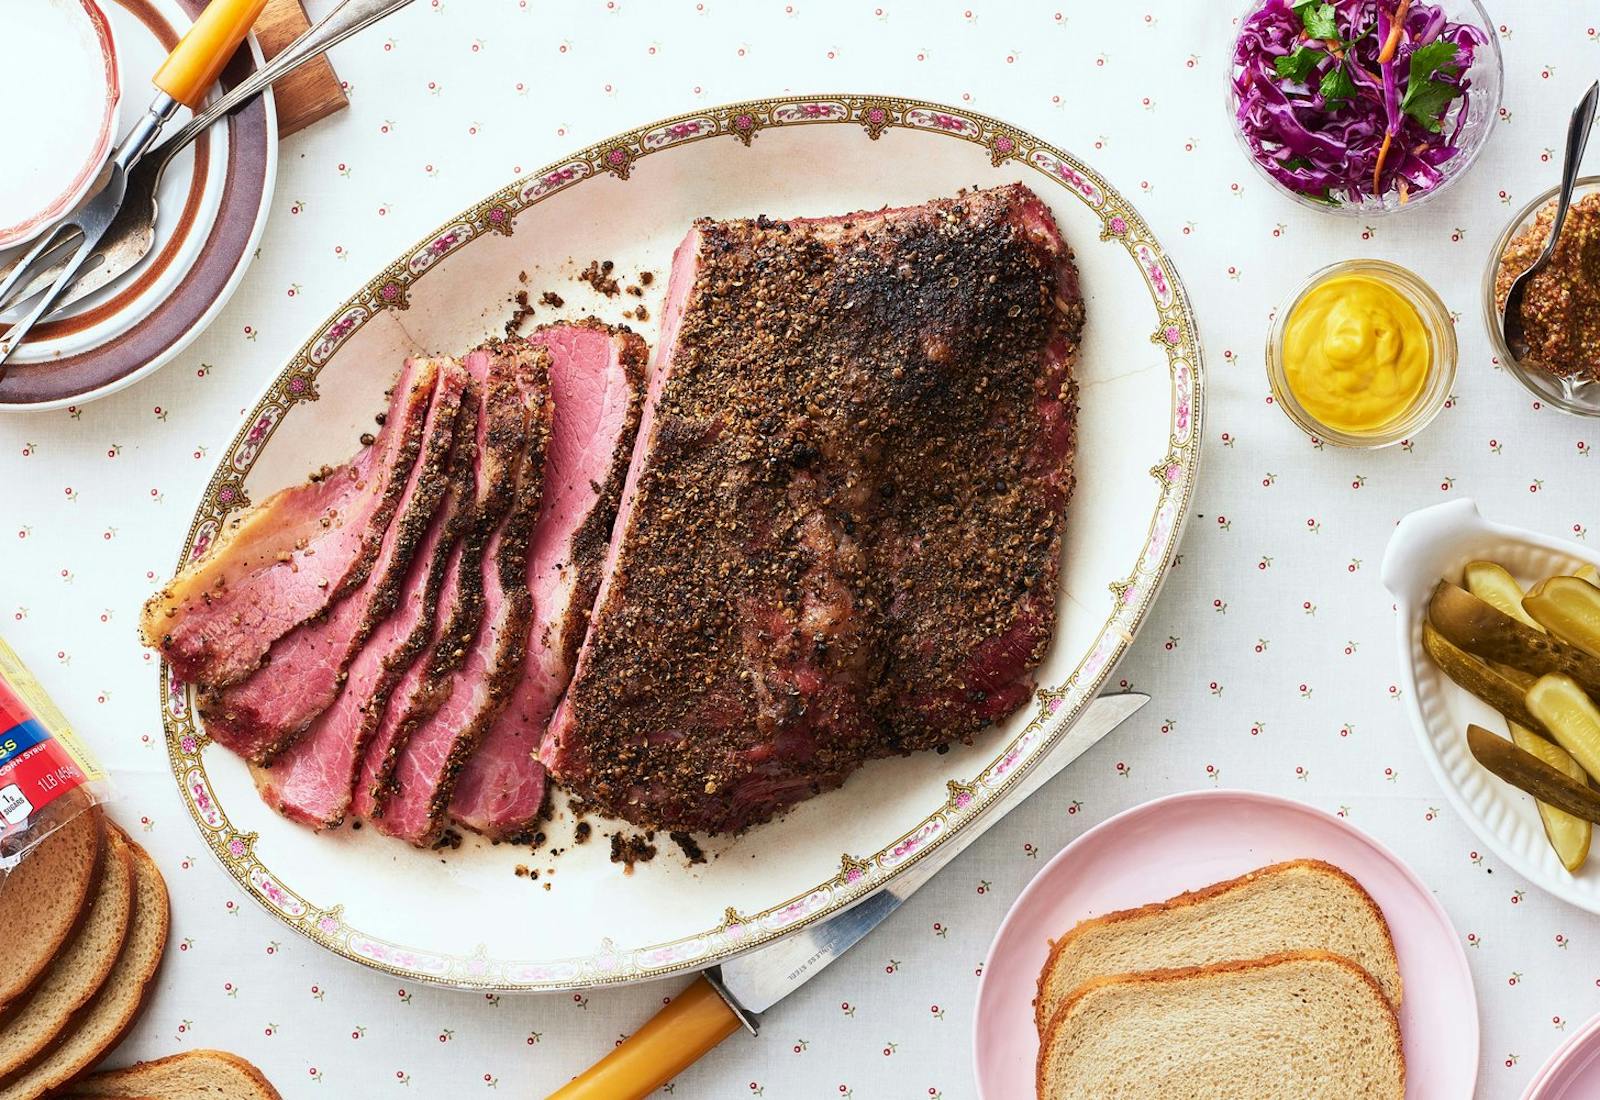 Partially sliced pastrami on oblong plate alongside grainy and smooth mustard, pickles, sliced bread, and purple slaw atop flower-dotted tablecloth.